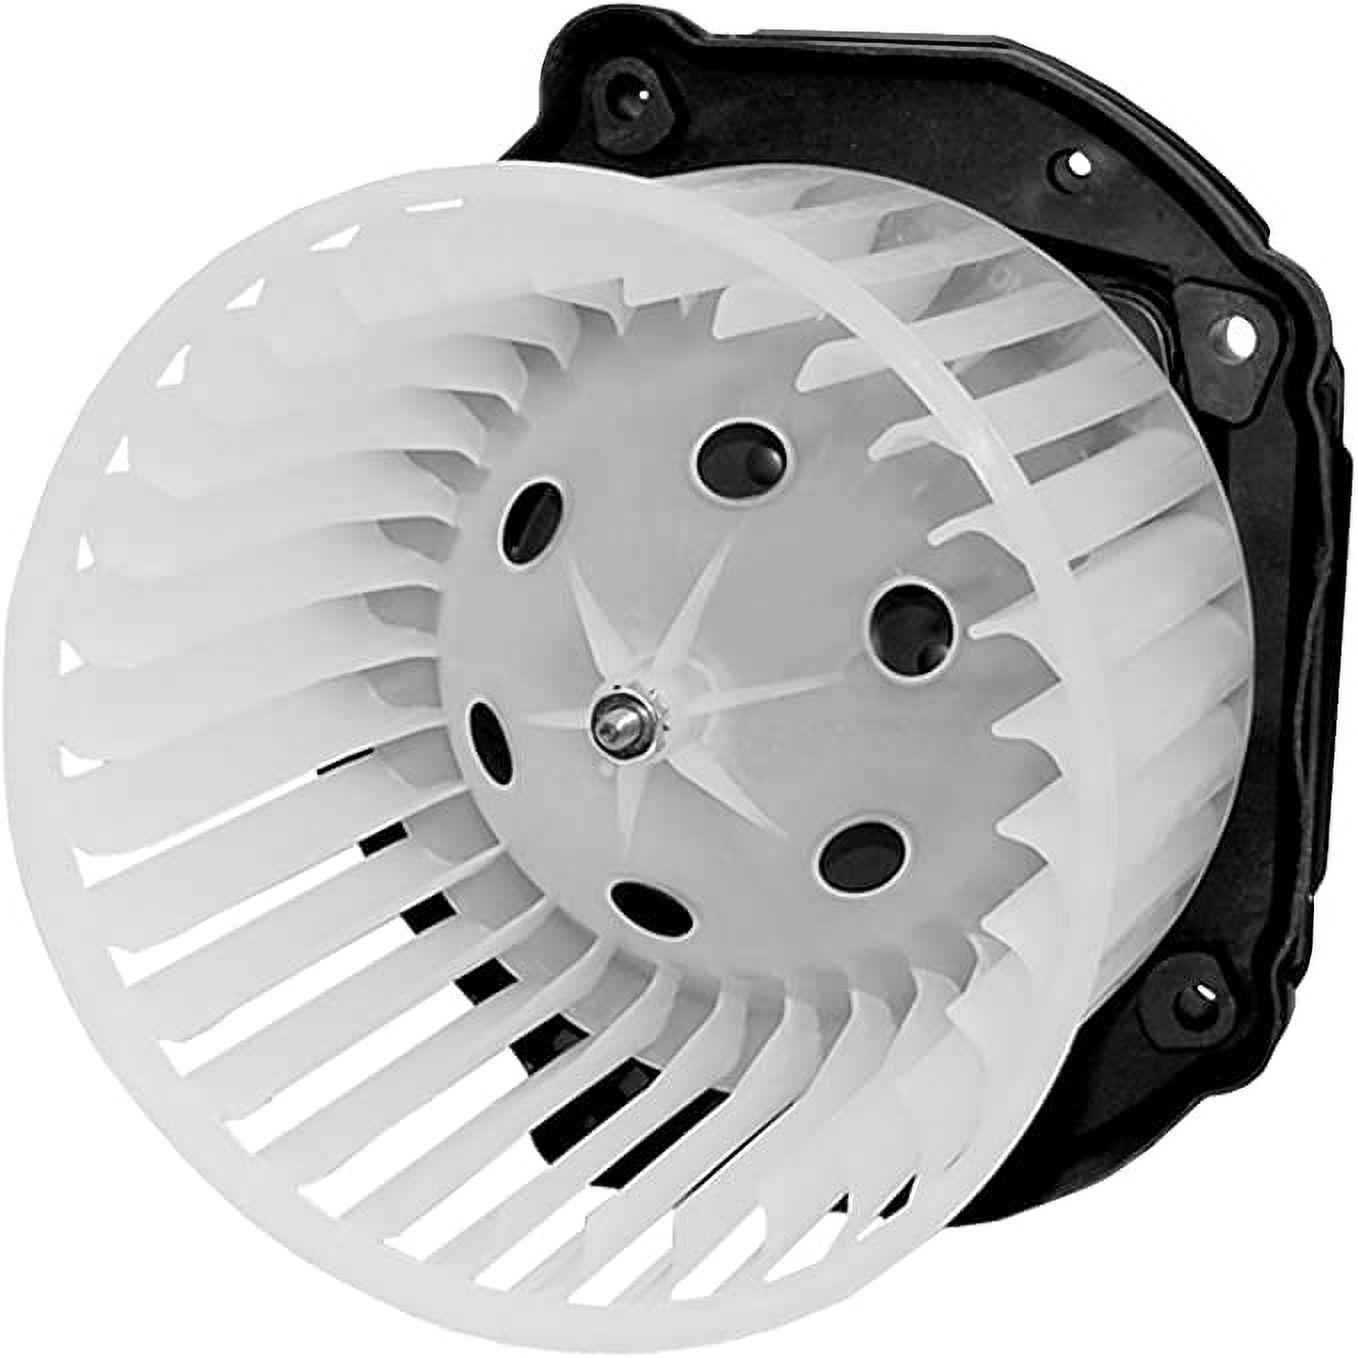 ACDelco GM Genuine Parts 15-80665 Heating and Air Conditioning Blower Motor with Wheel Fits select: 1997-2000 CHEVROLET GMT-400, 1997-1999 CHEVROLET TAHOE - image 1 of 2